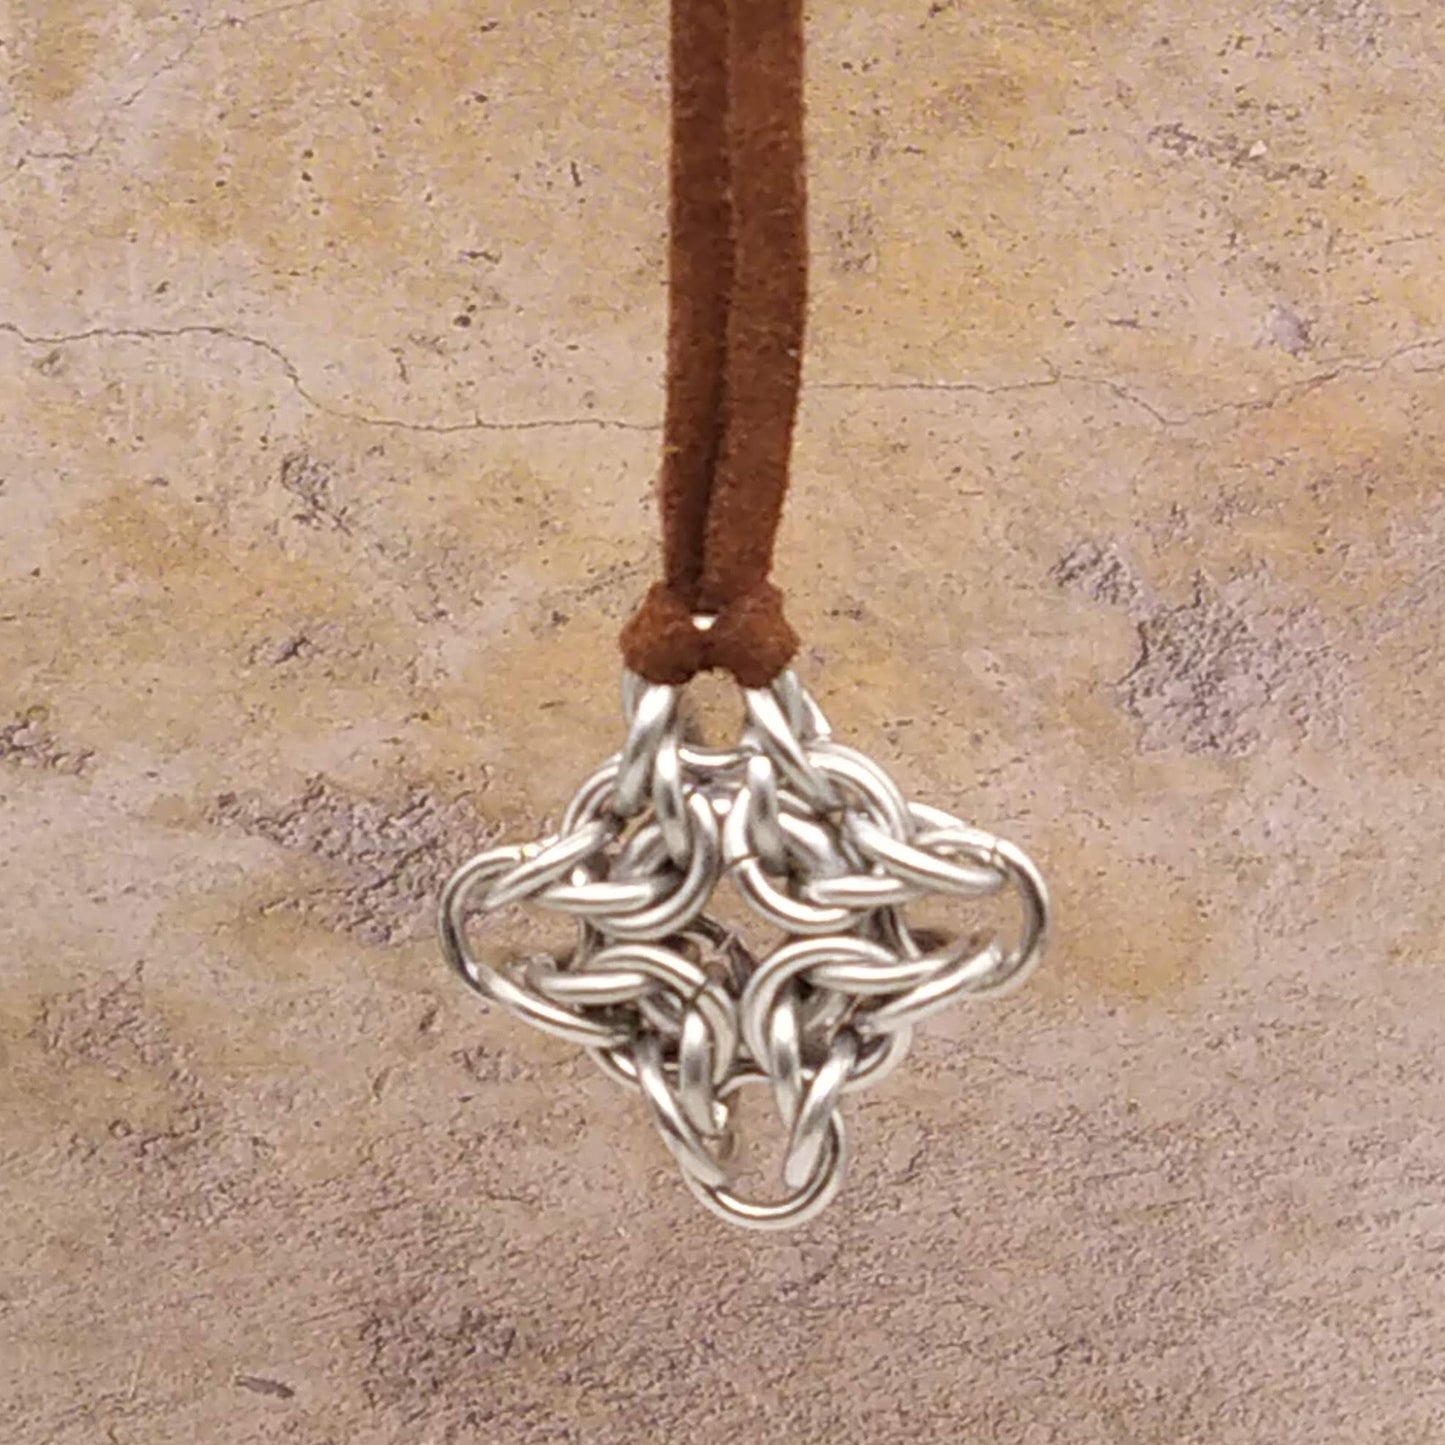 Keeper of the Cross - necklace